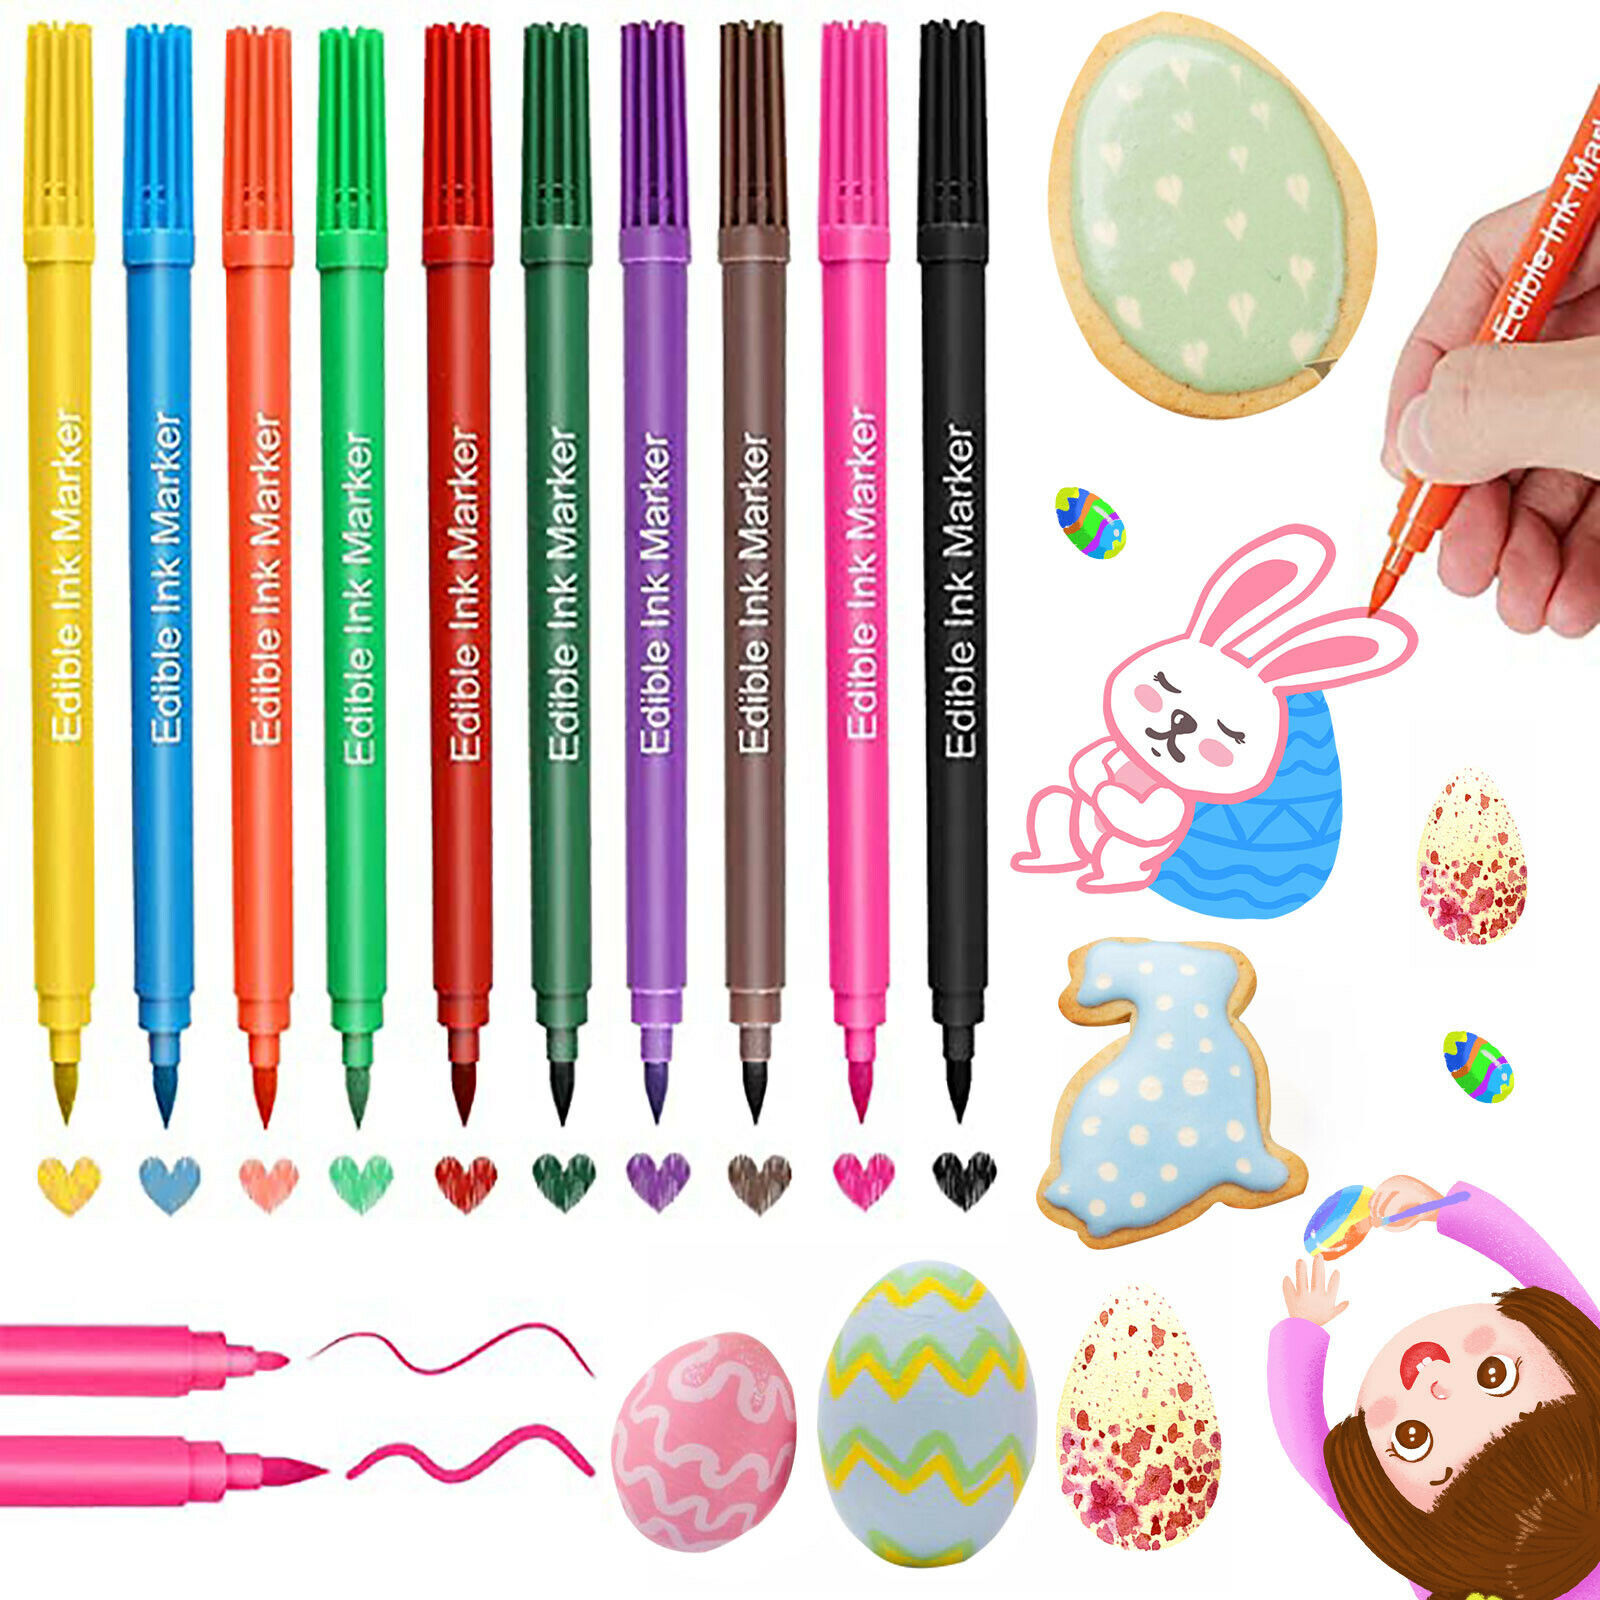 Food Coloring Pens Food Grade With For Decorating Cakes Cookies Easter Eggs